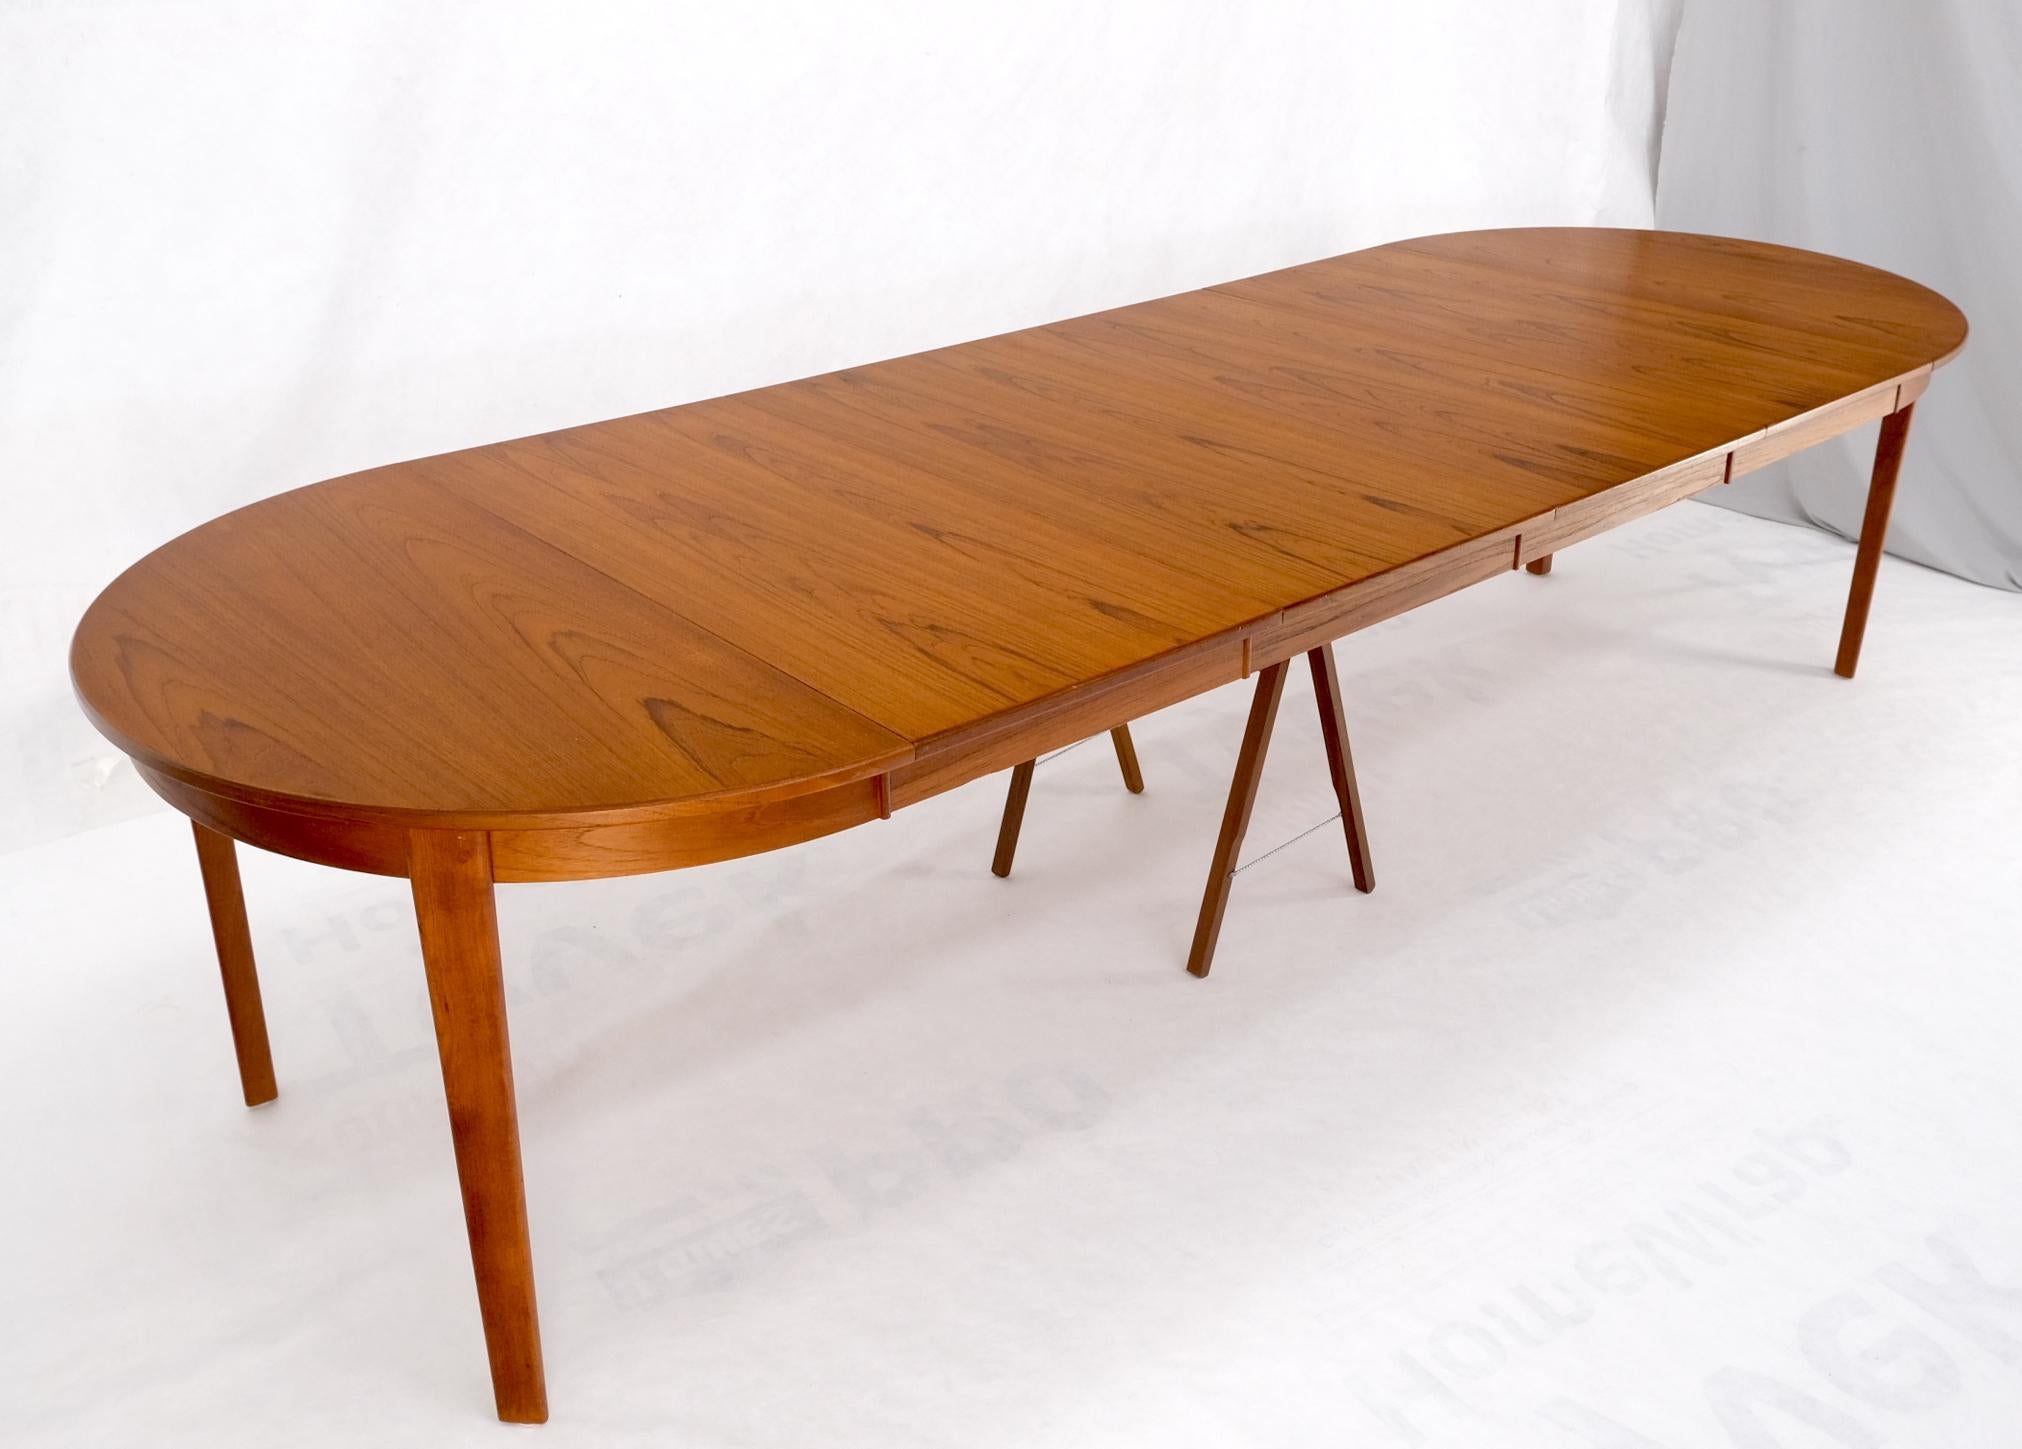 Danish Teak Mid Century Modern Round Dining Banquet Conference Table 4 Leaf MINT For Sale 12